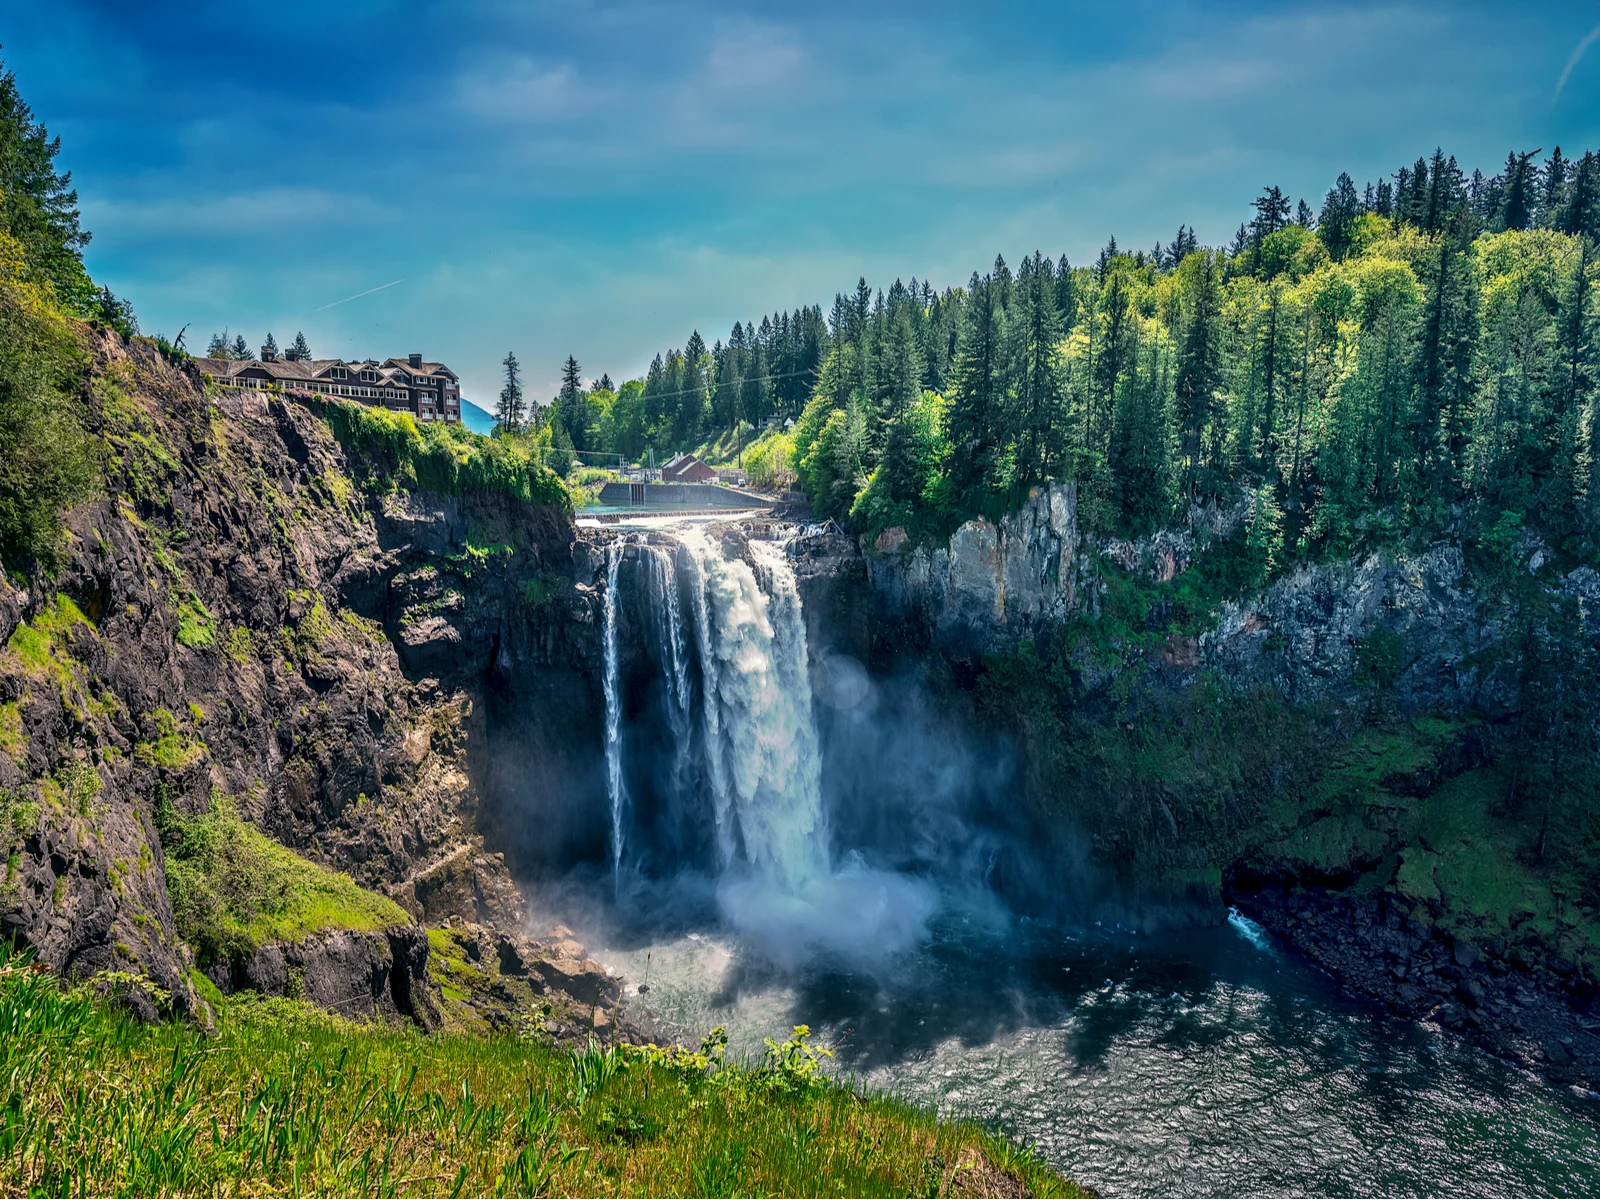 Snoqualmie Falls near Bellevue Washington, one of the best places to visit in Washington State